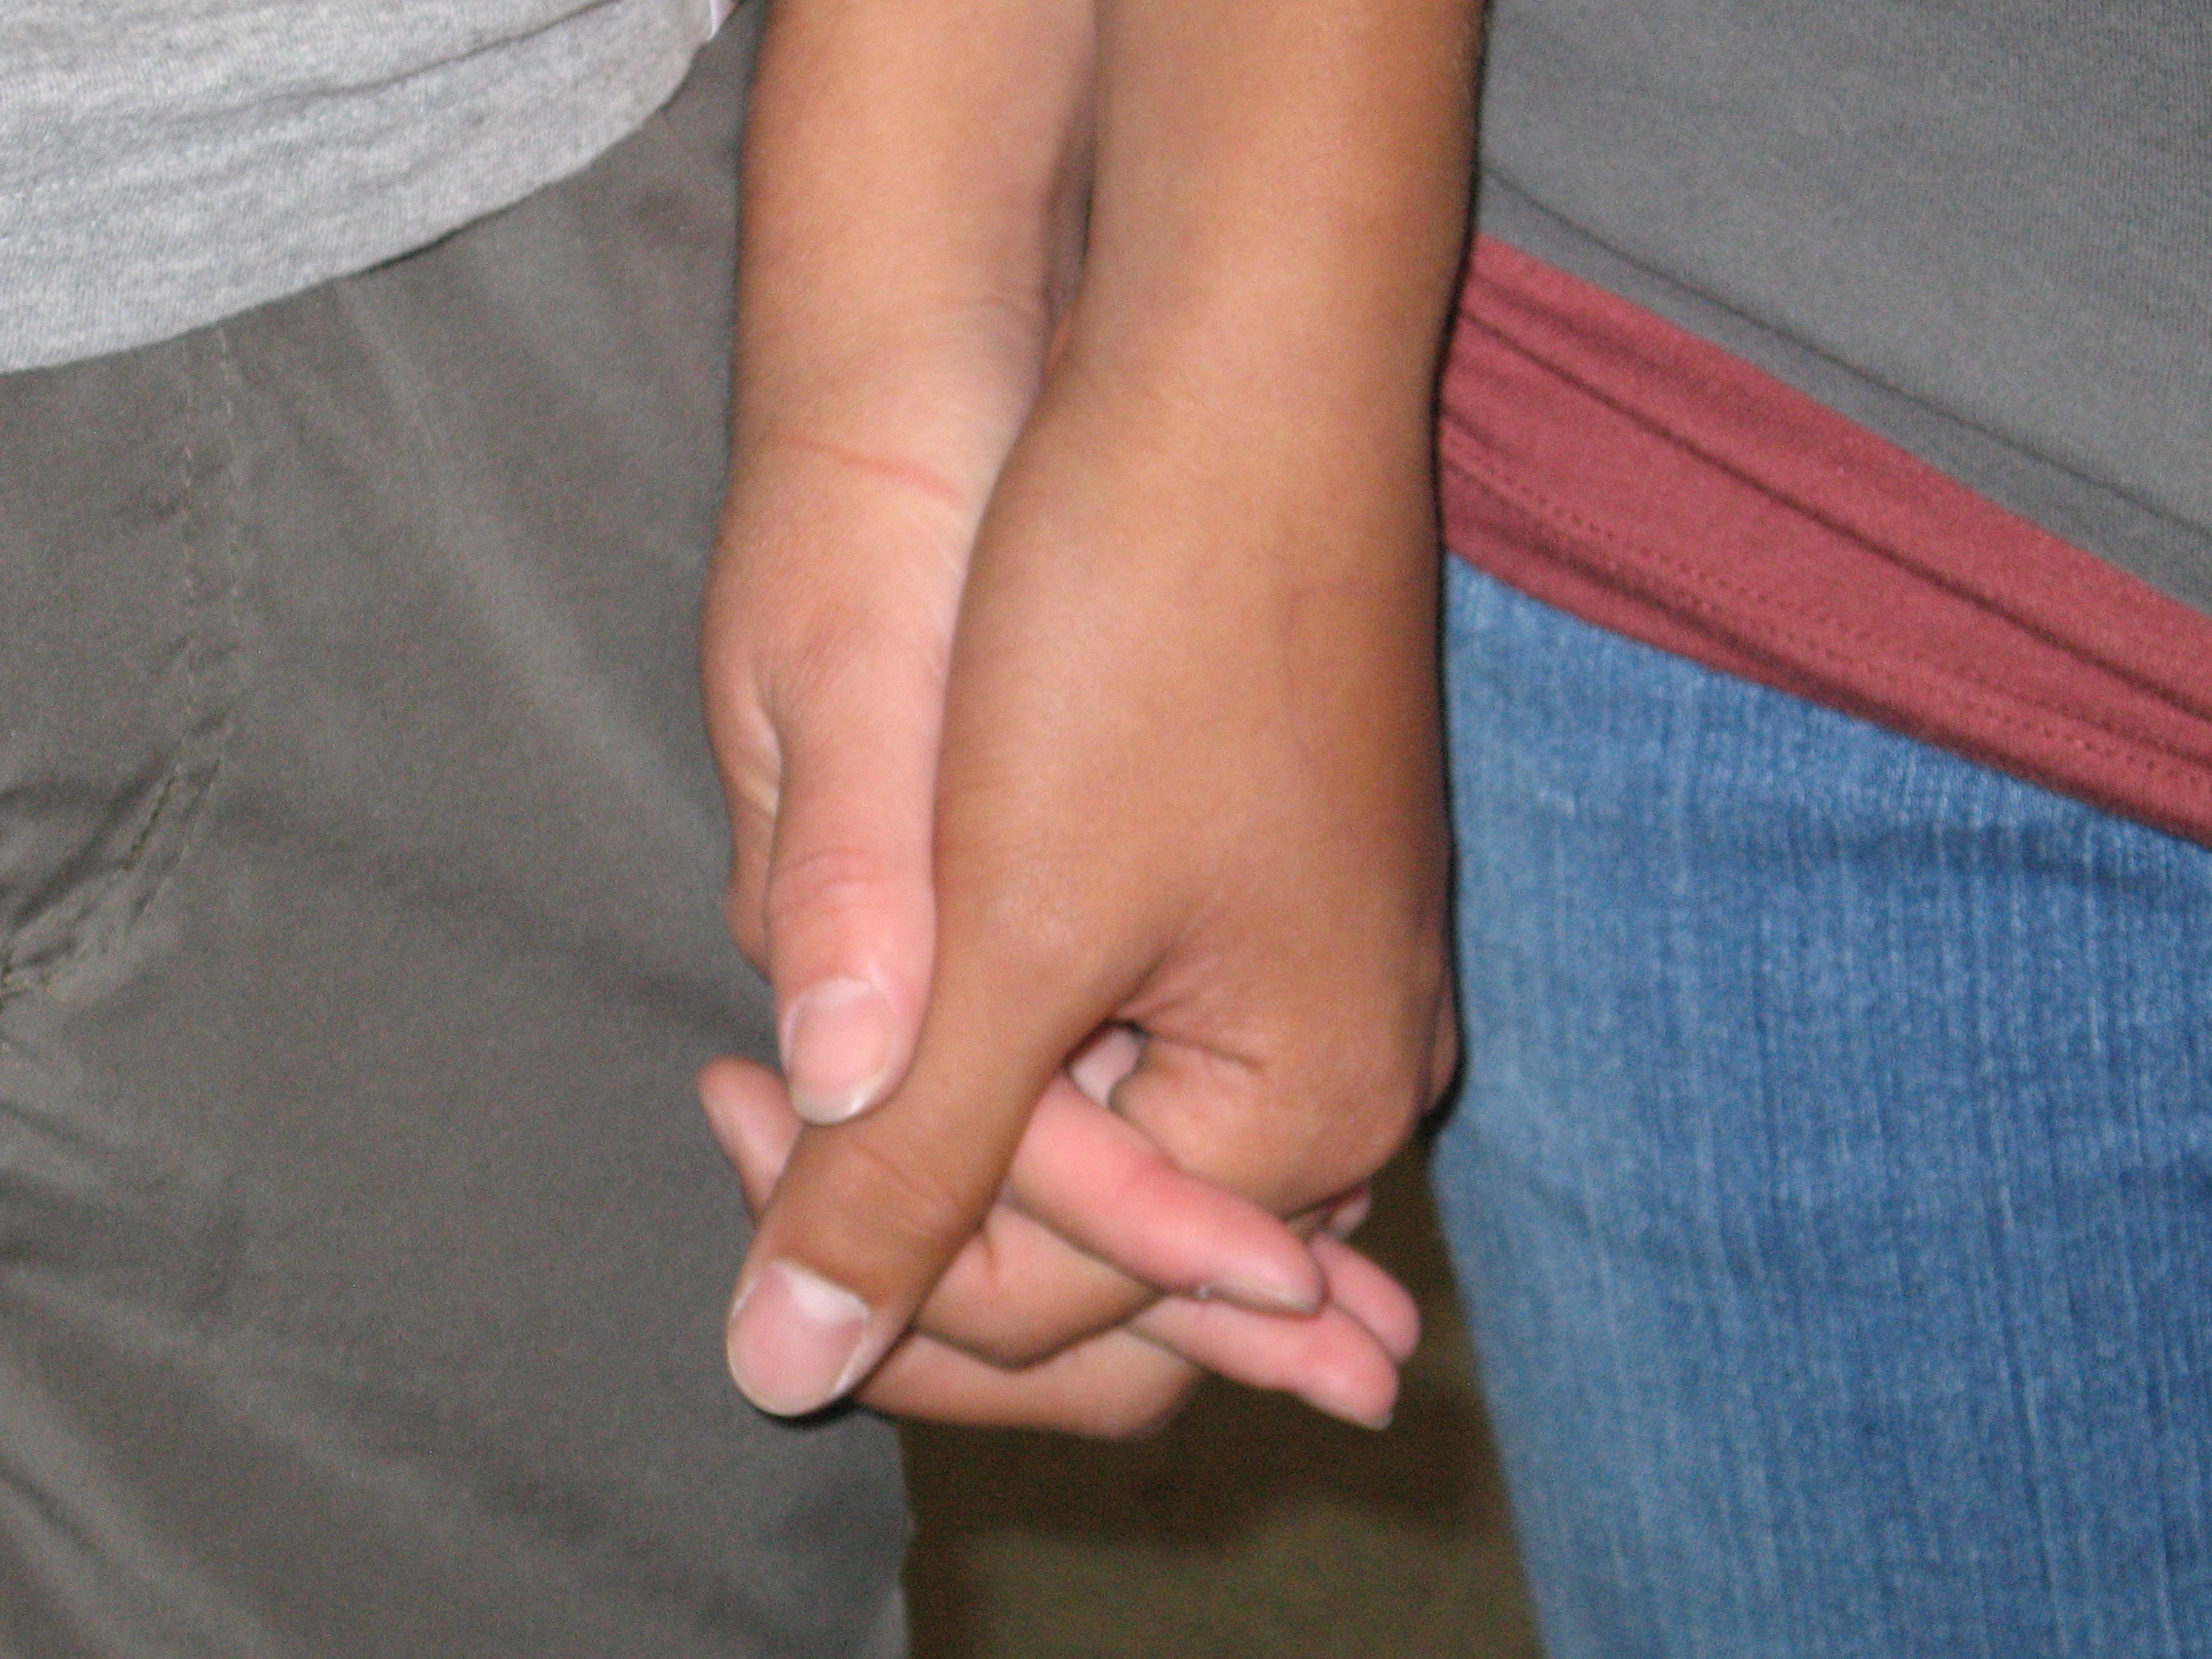 Couples who show affection in simple ways like holding hands have more positive perspective on their relationships.